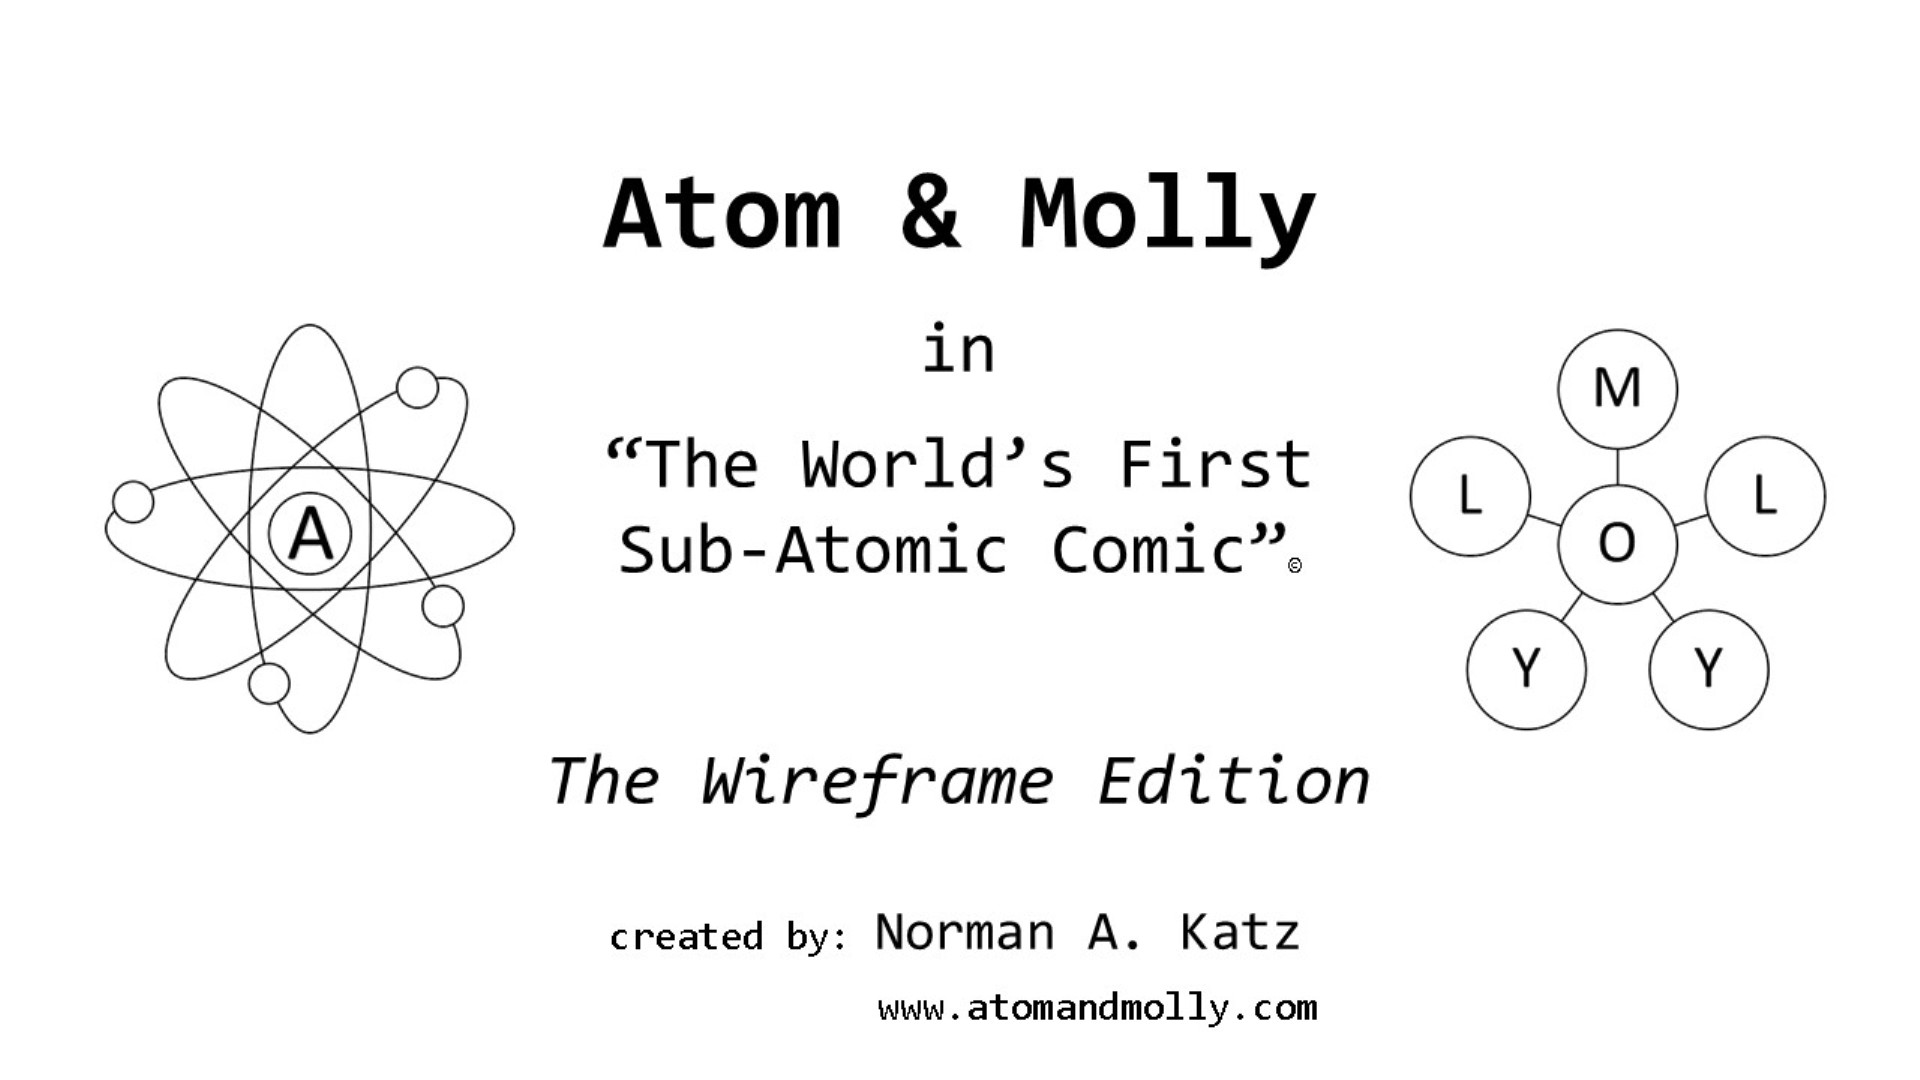 Atom & Molly: The Wireframe Edition  by Norman Katz